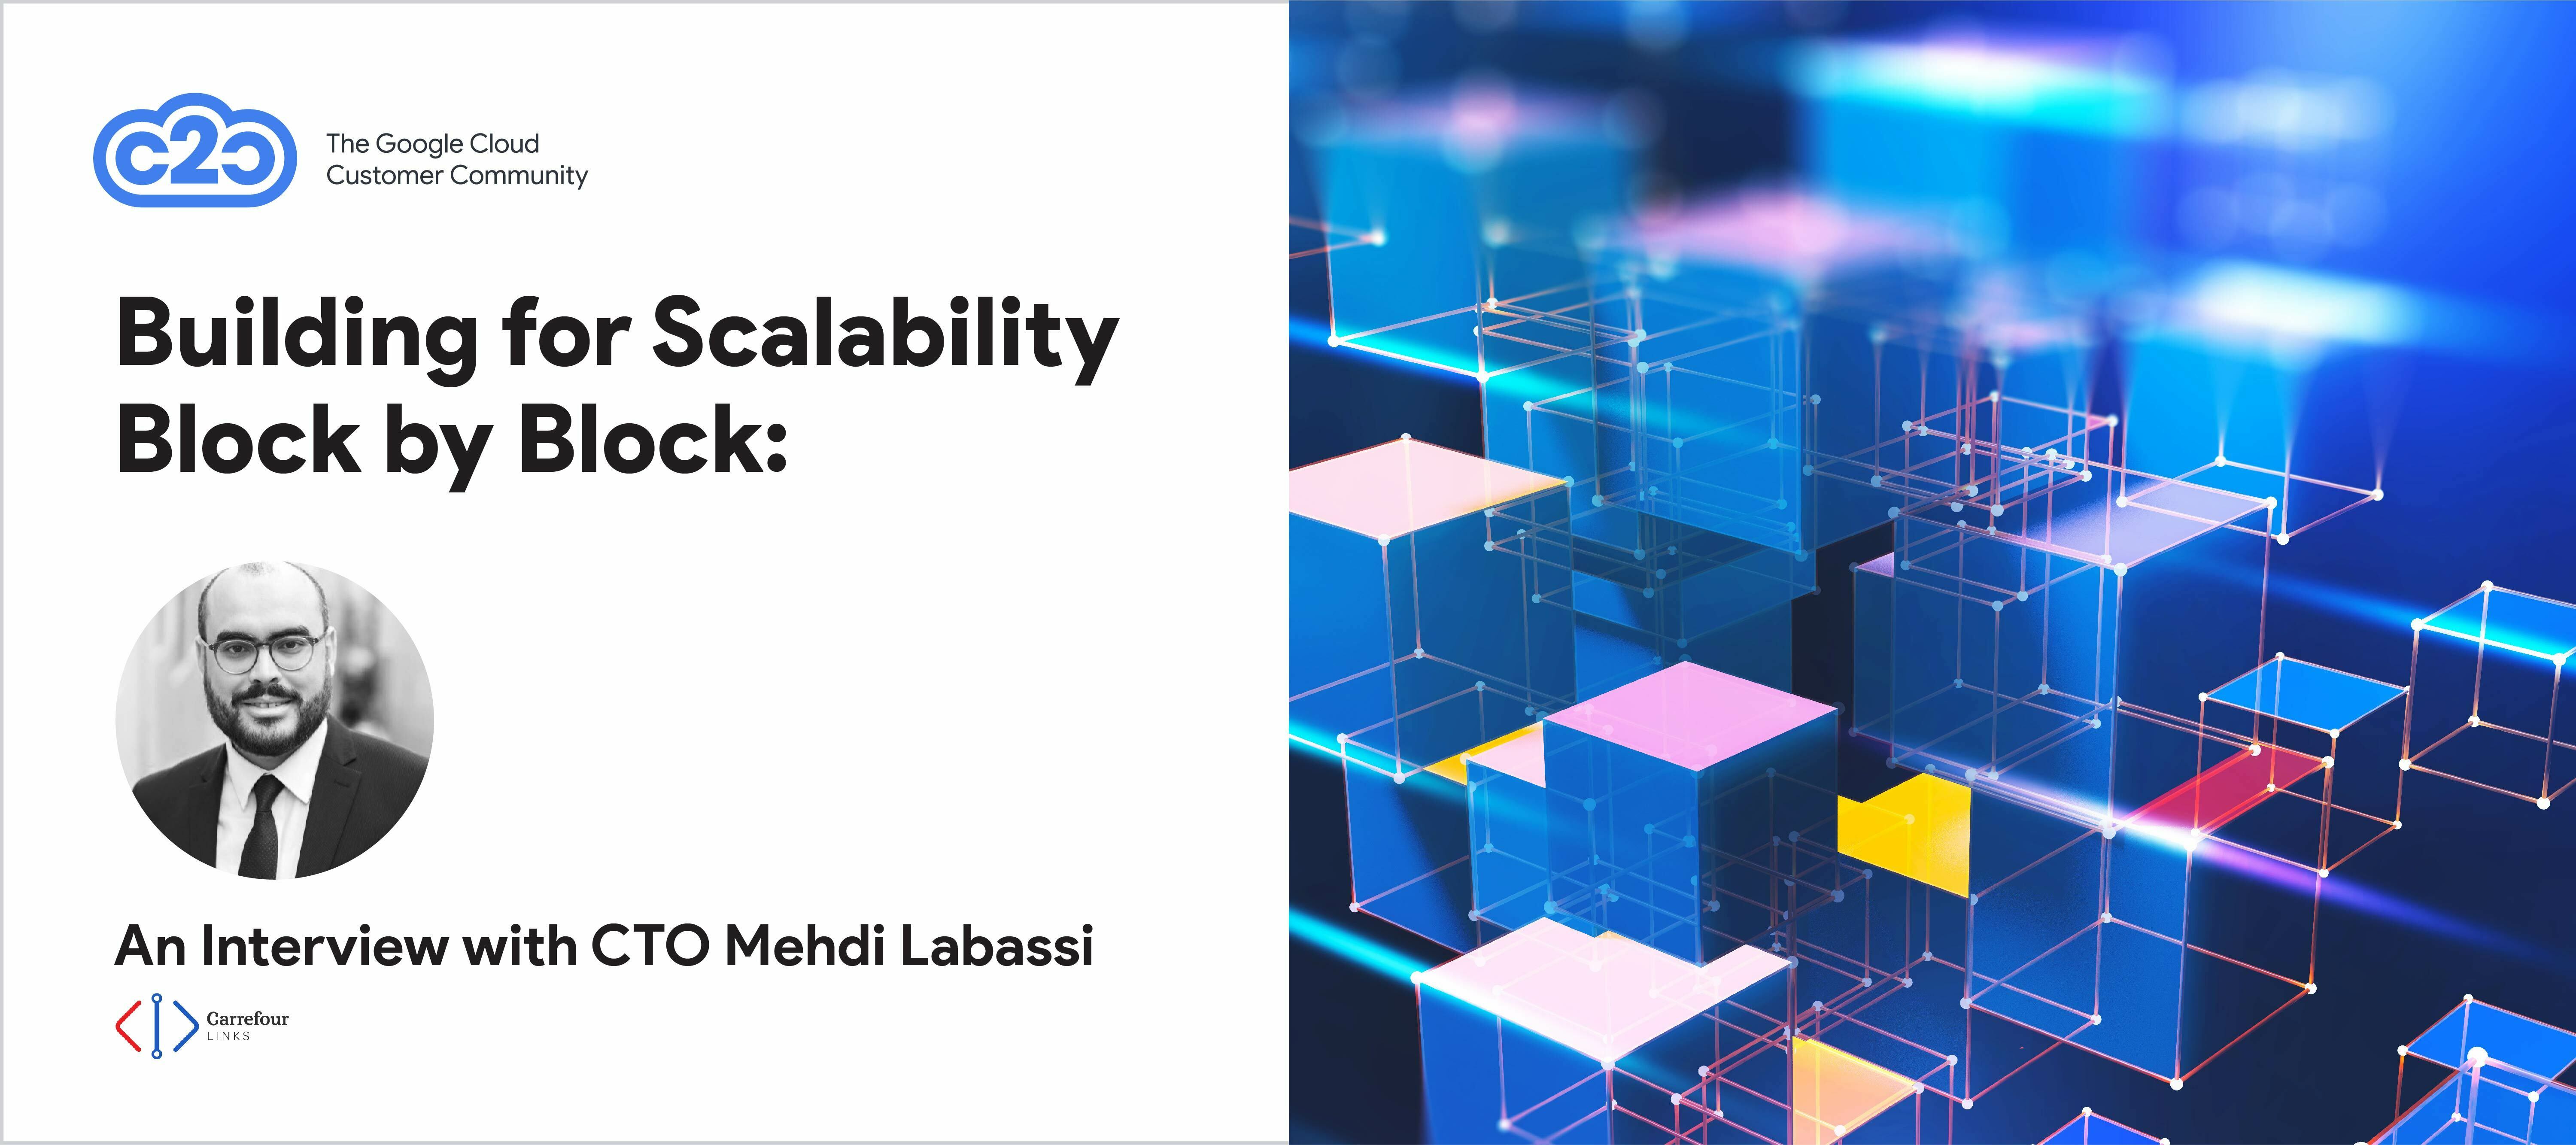 Building for Scalability, Block by Block: An Interview with Carrefour Links CTO Mehdi Labassi